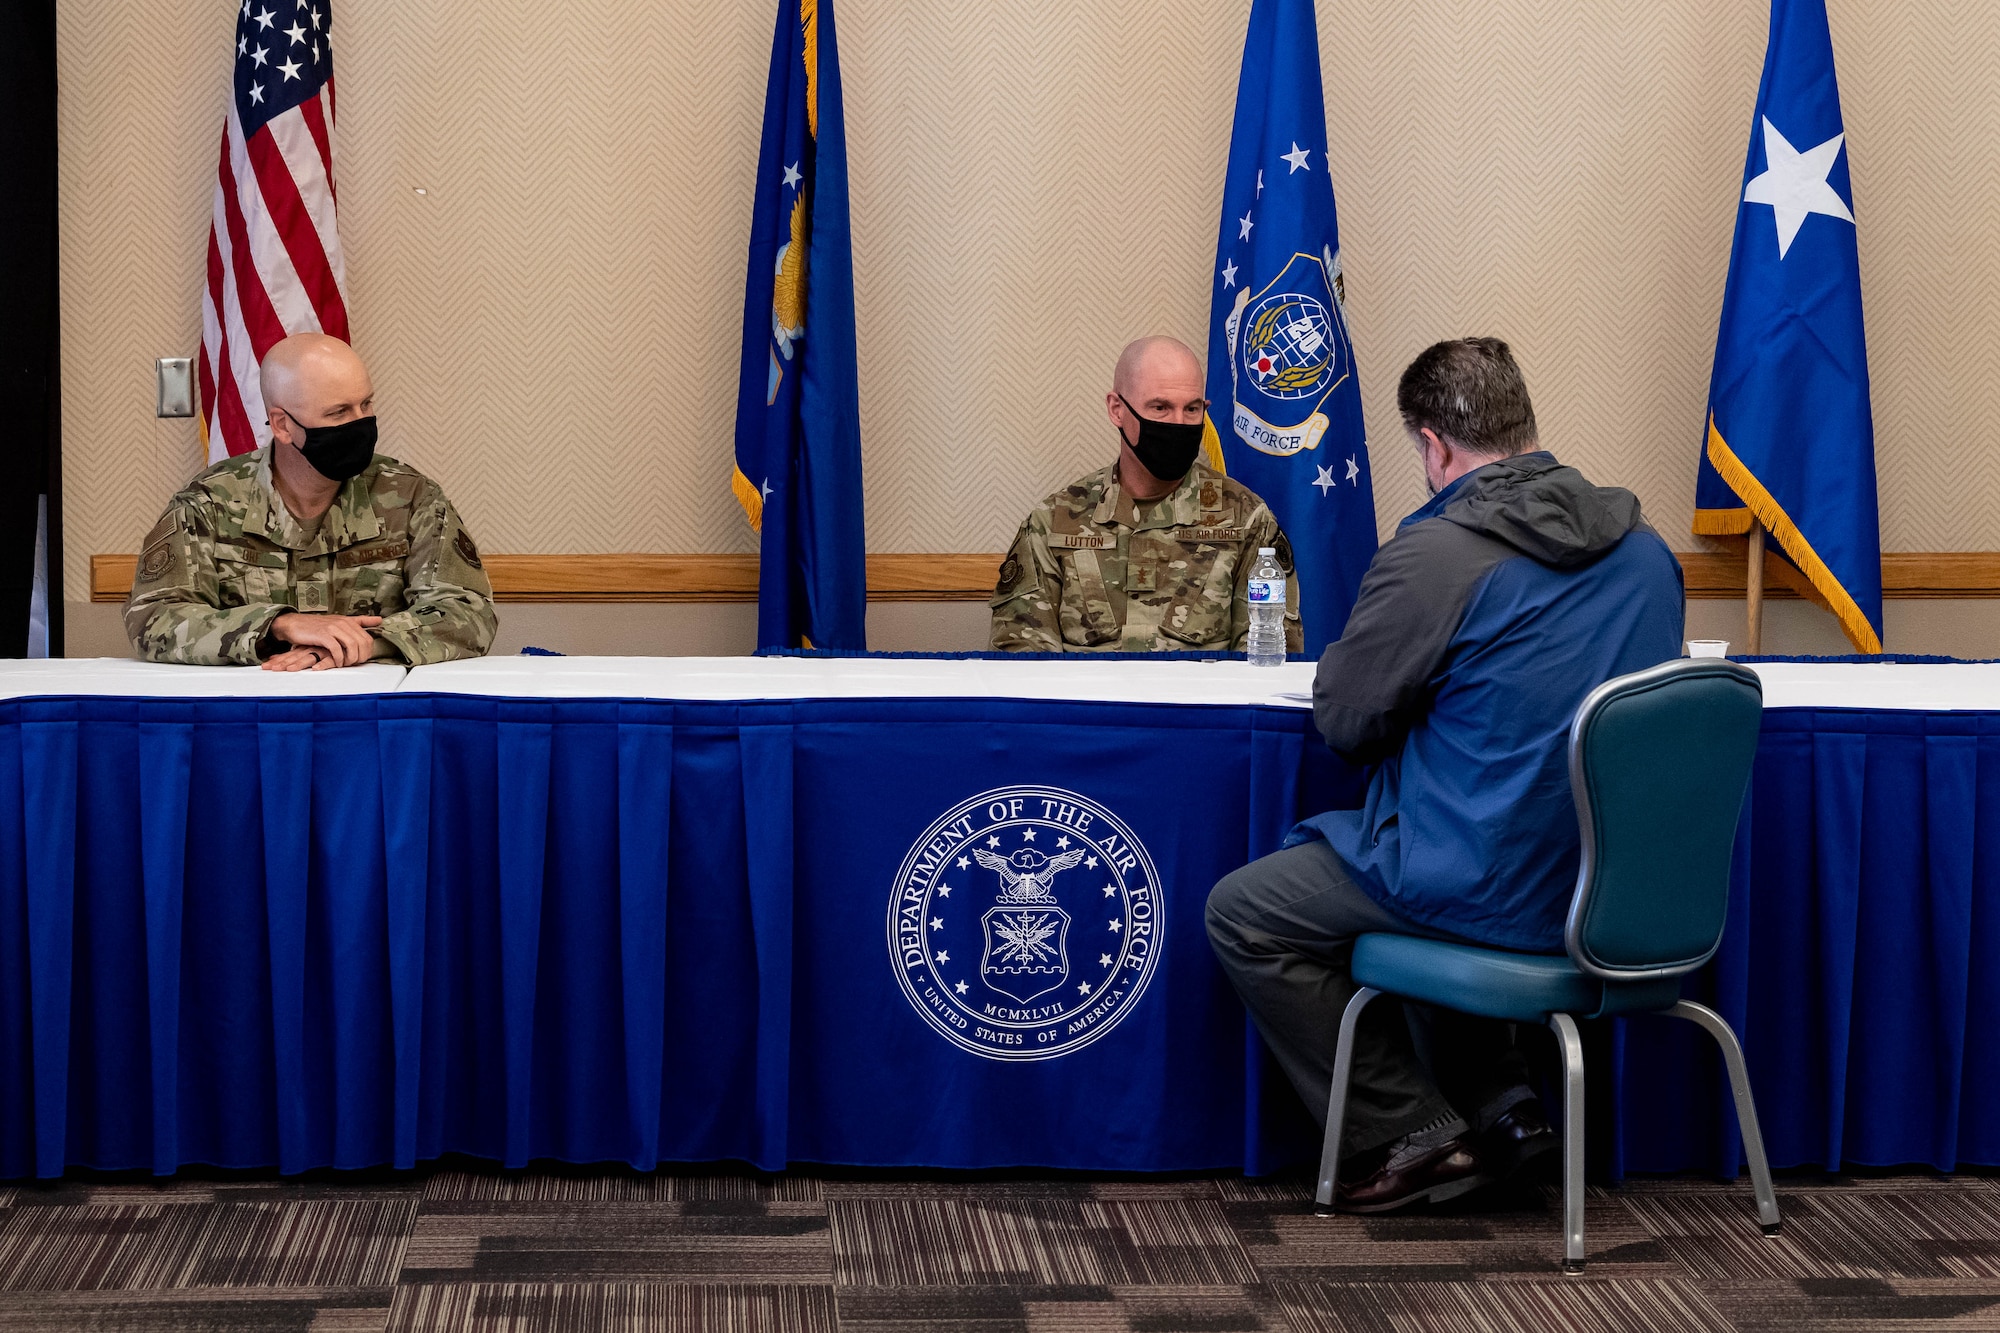 Two U.S. Air Force officers are interviewed while seated at a table.